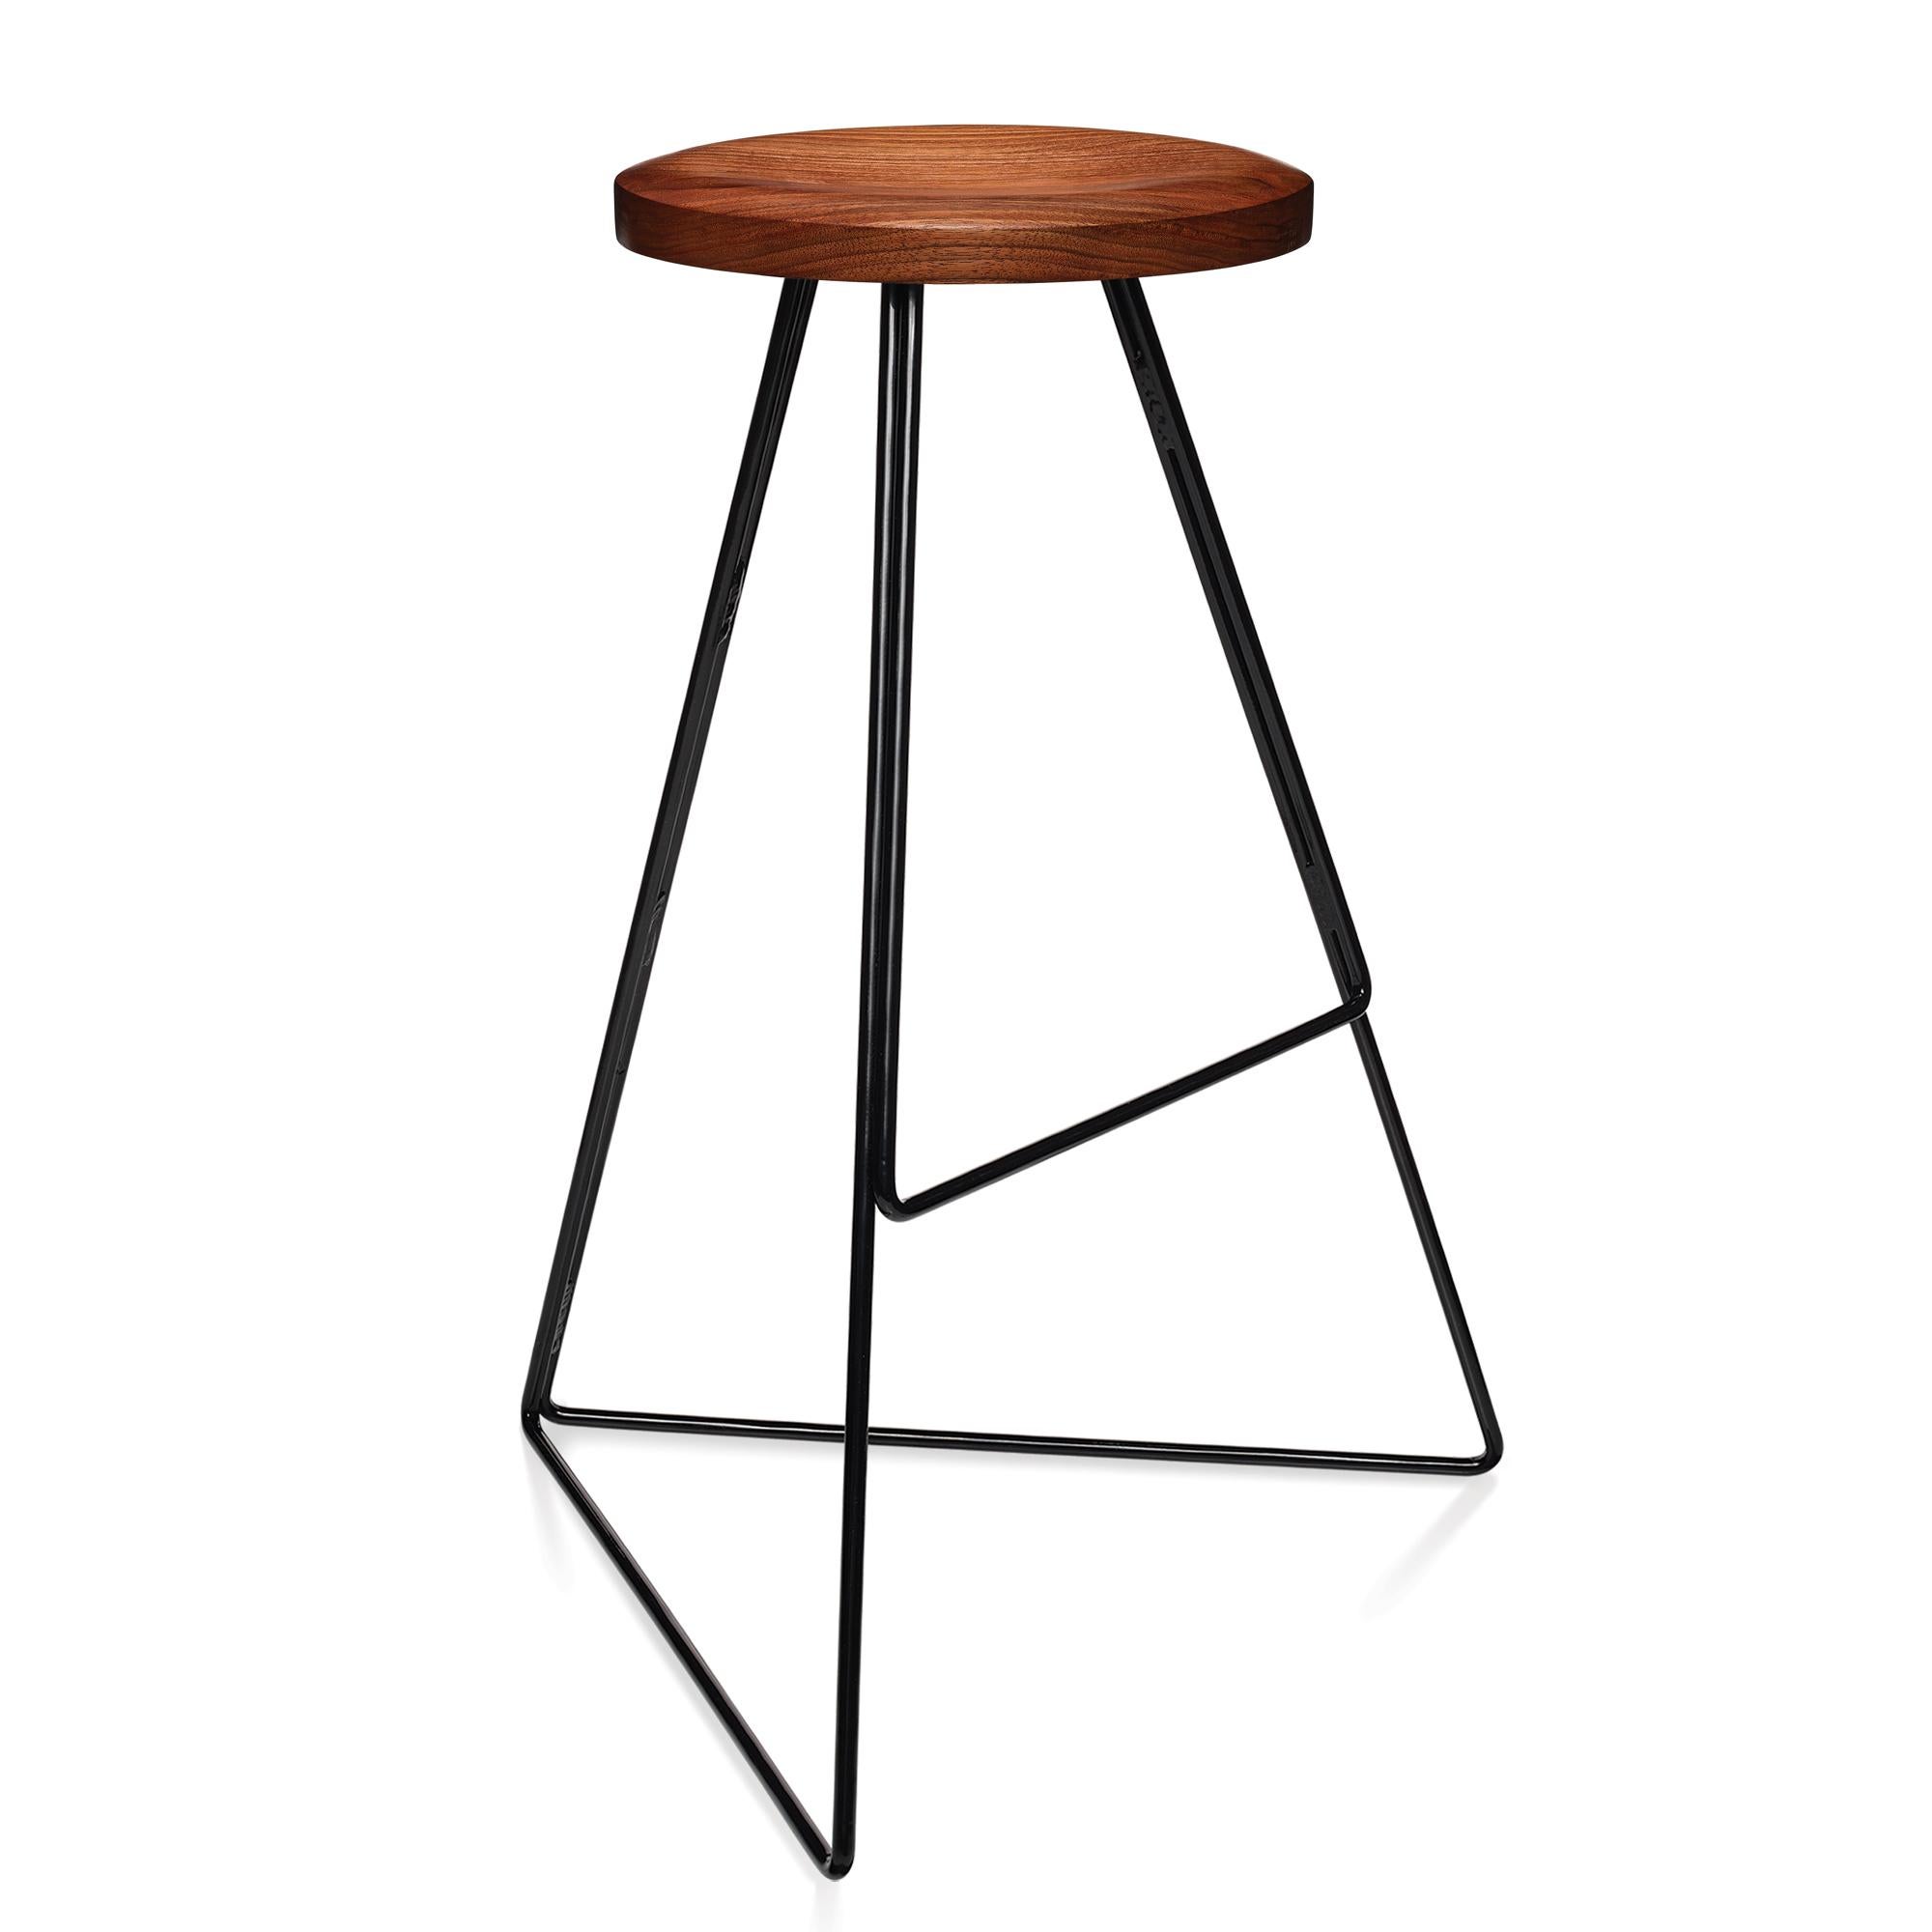 Powder-Coated The Coleman Stool, Black and Walnut, Counter Height For Sale